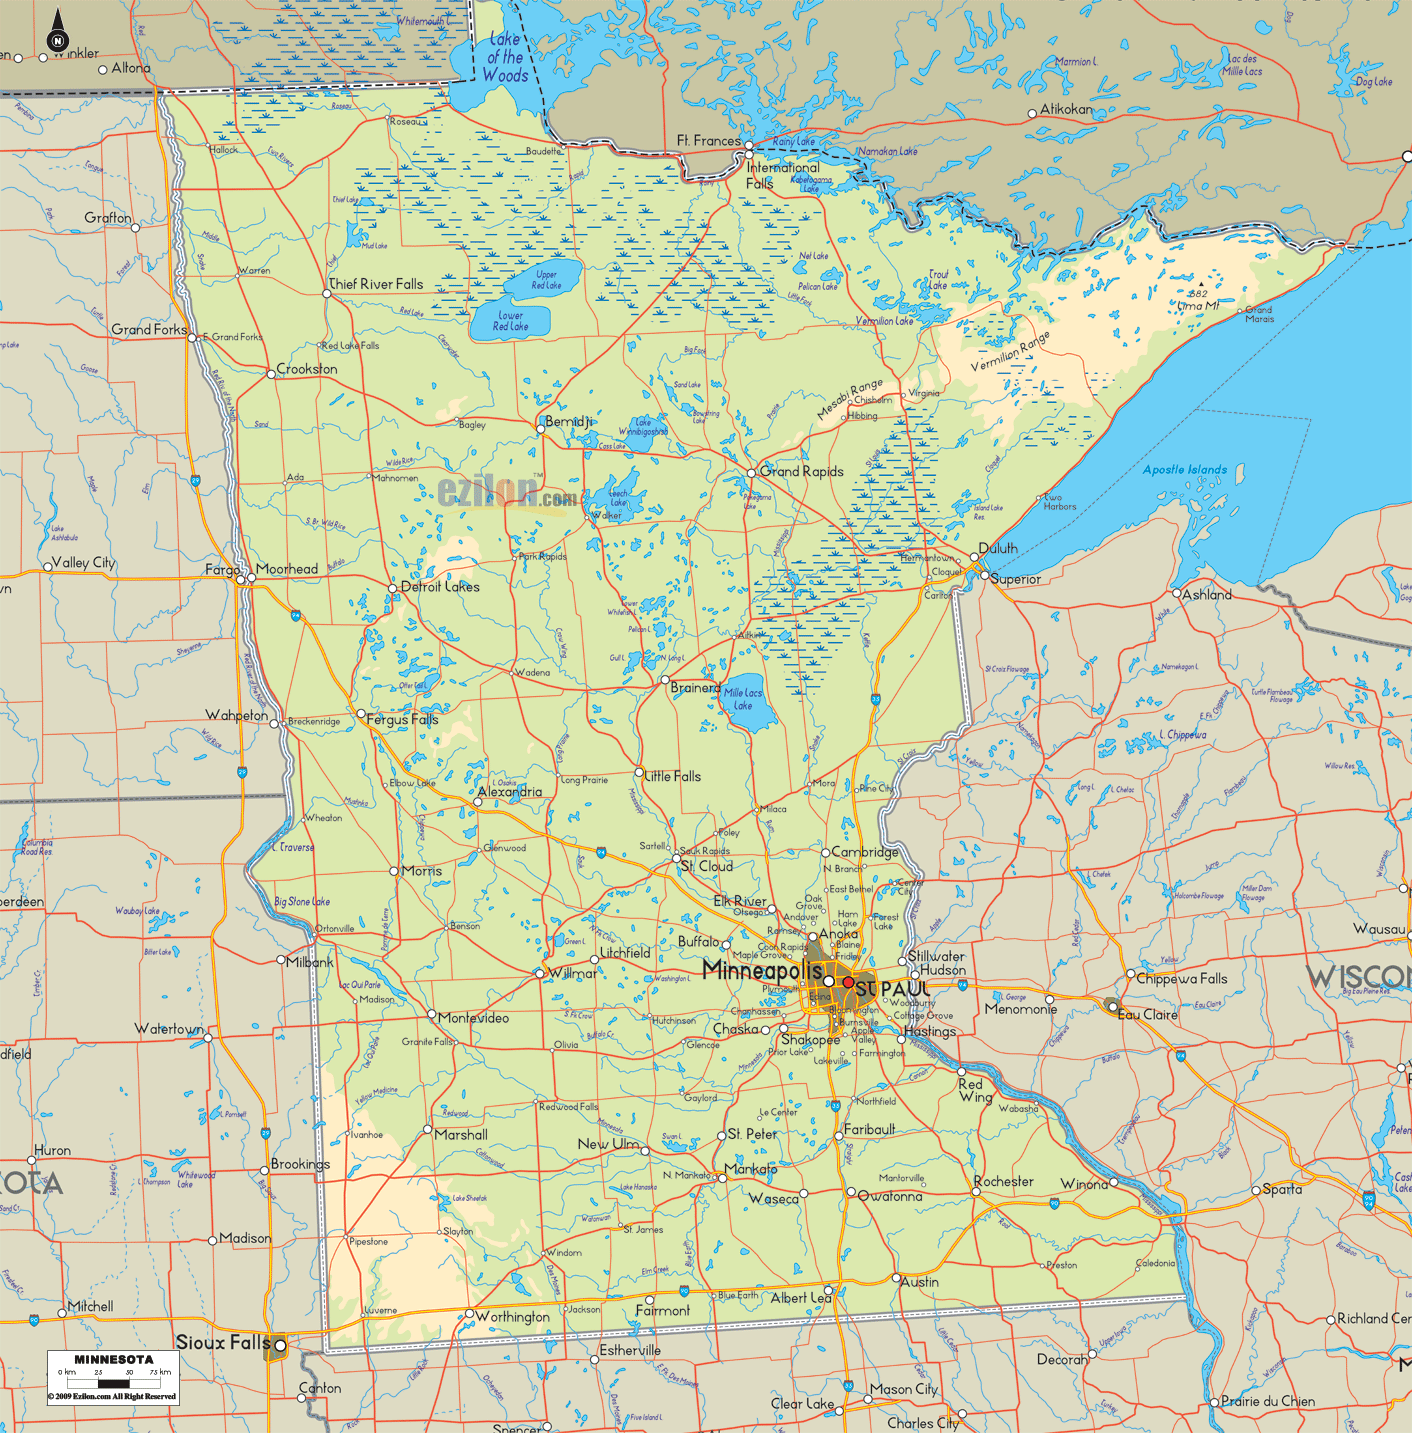 Physical map of Minnesota State, USA showing major geographical features such as rivers, lakes, mountains, hills, topography and land formations.